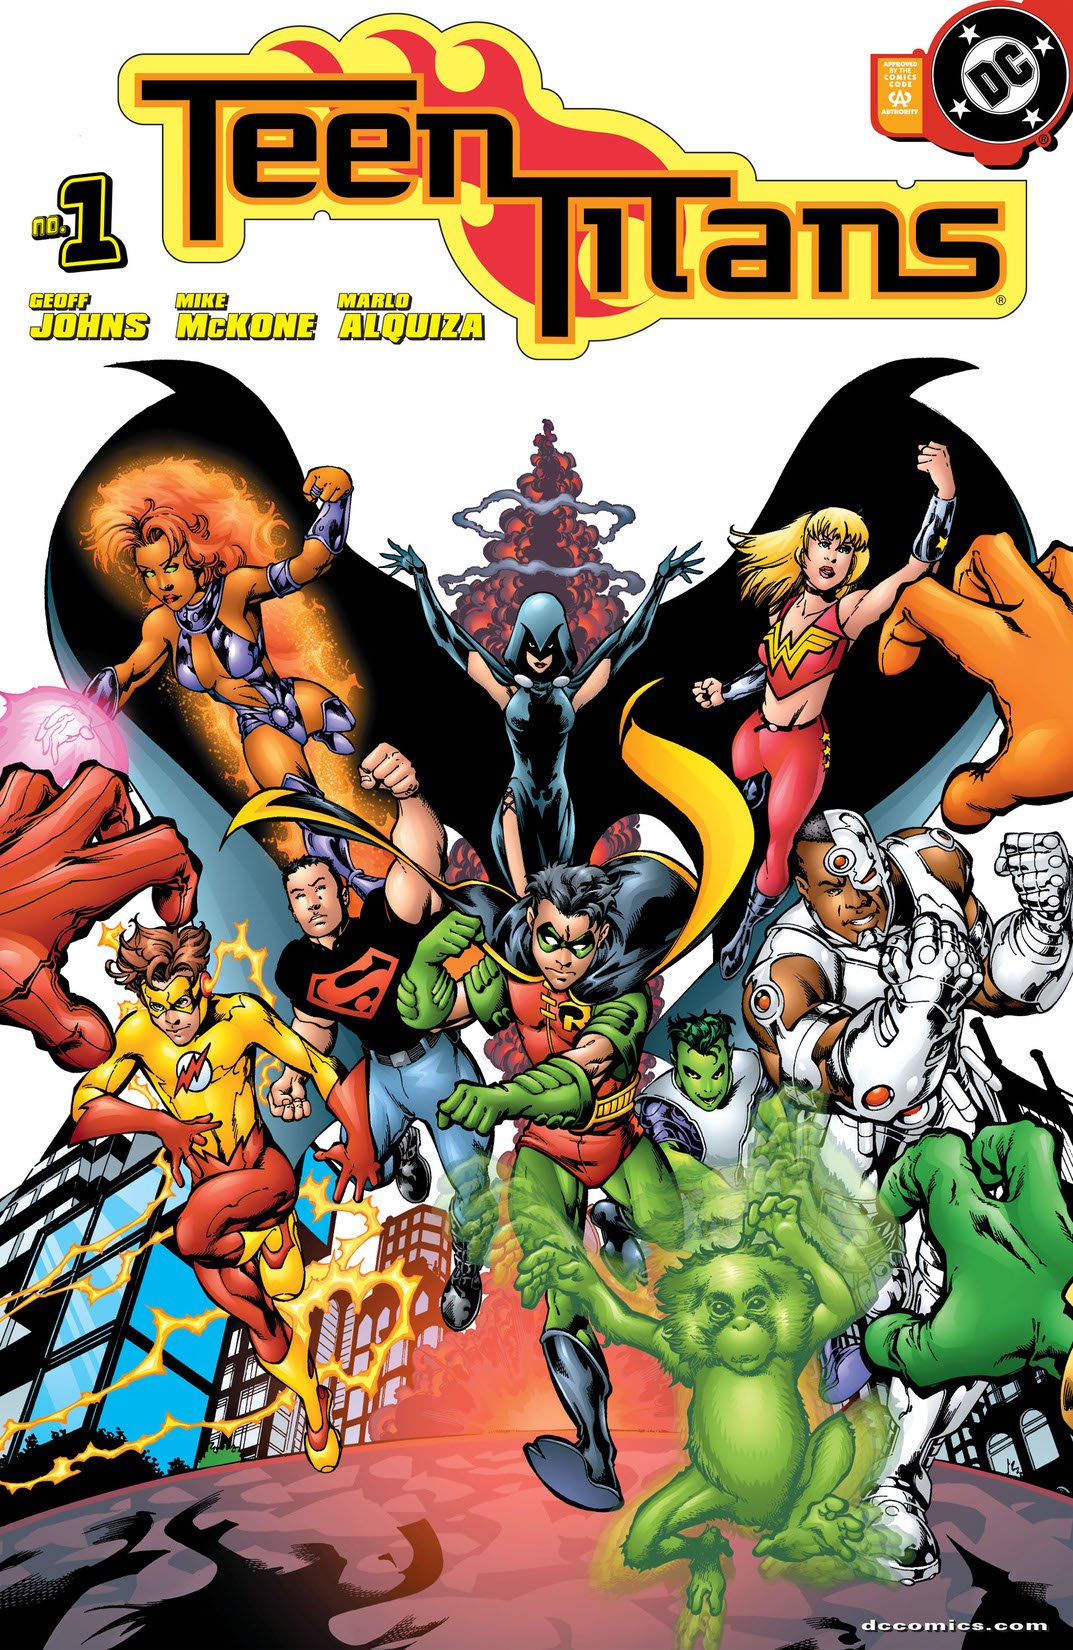 cover image of teen titans lineup from 2003